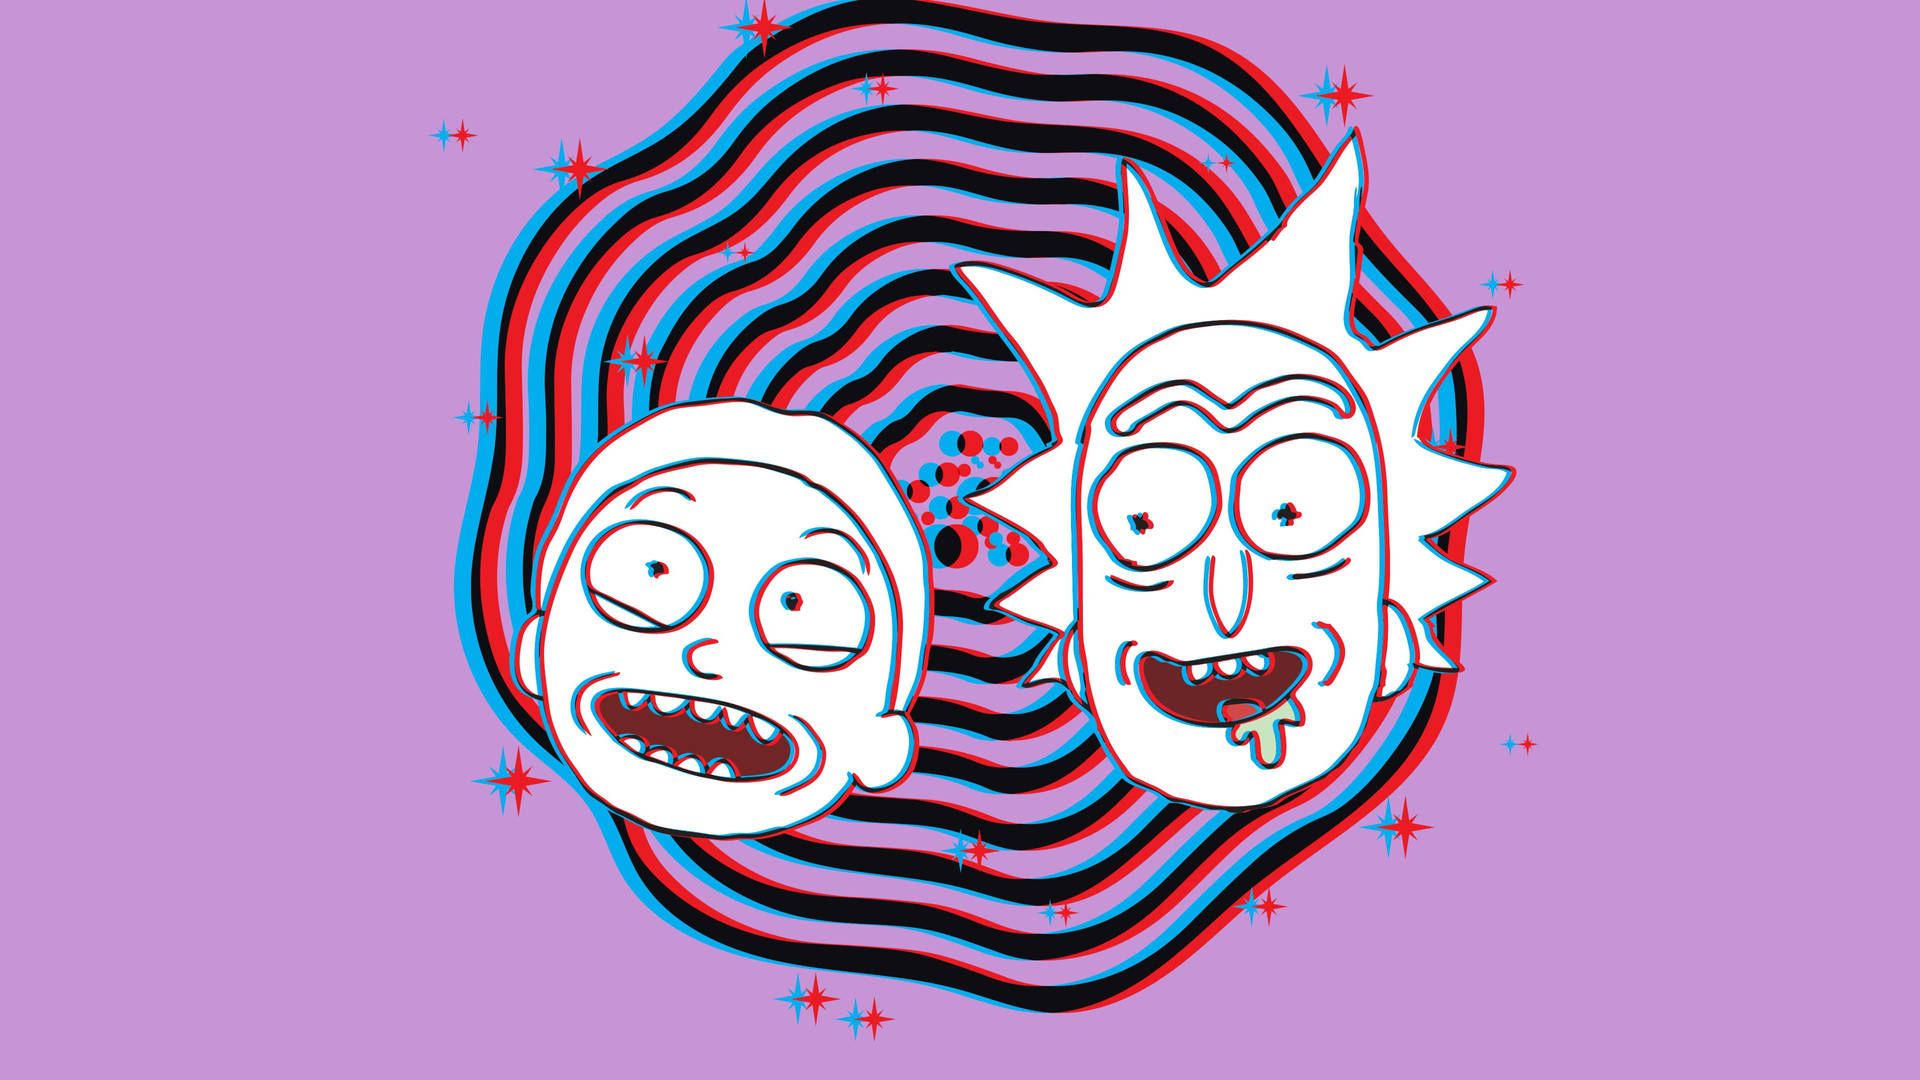 Free Rick And Morty Stoner Wallpaper Downloads, [100+] Rick And Morty  Stoner Wallpapers for FREE 